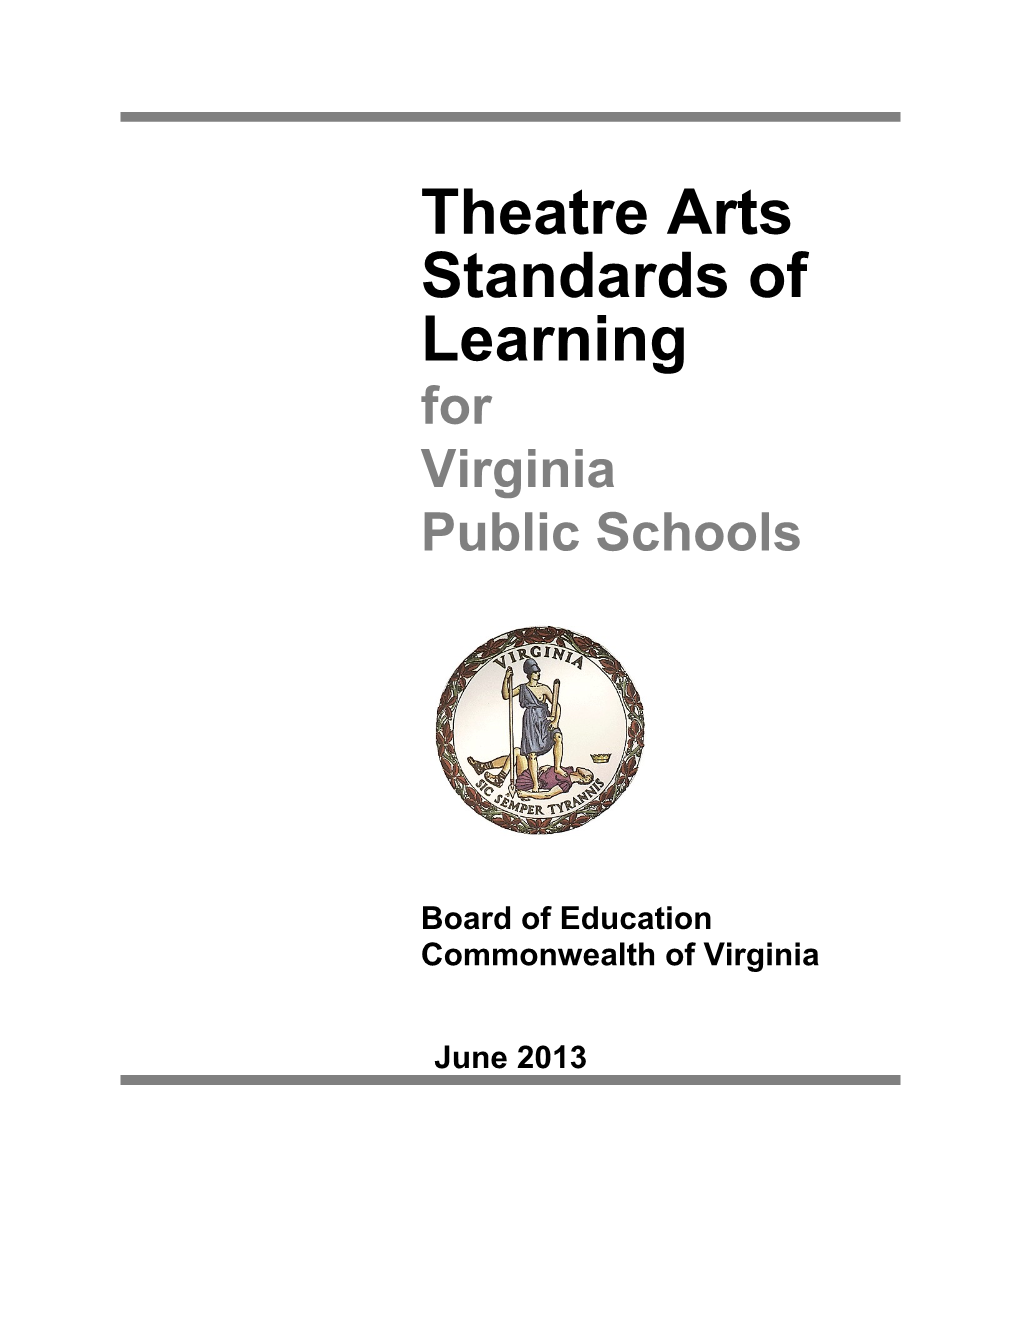 Theatre Arts Standards of Learning